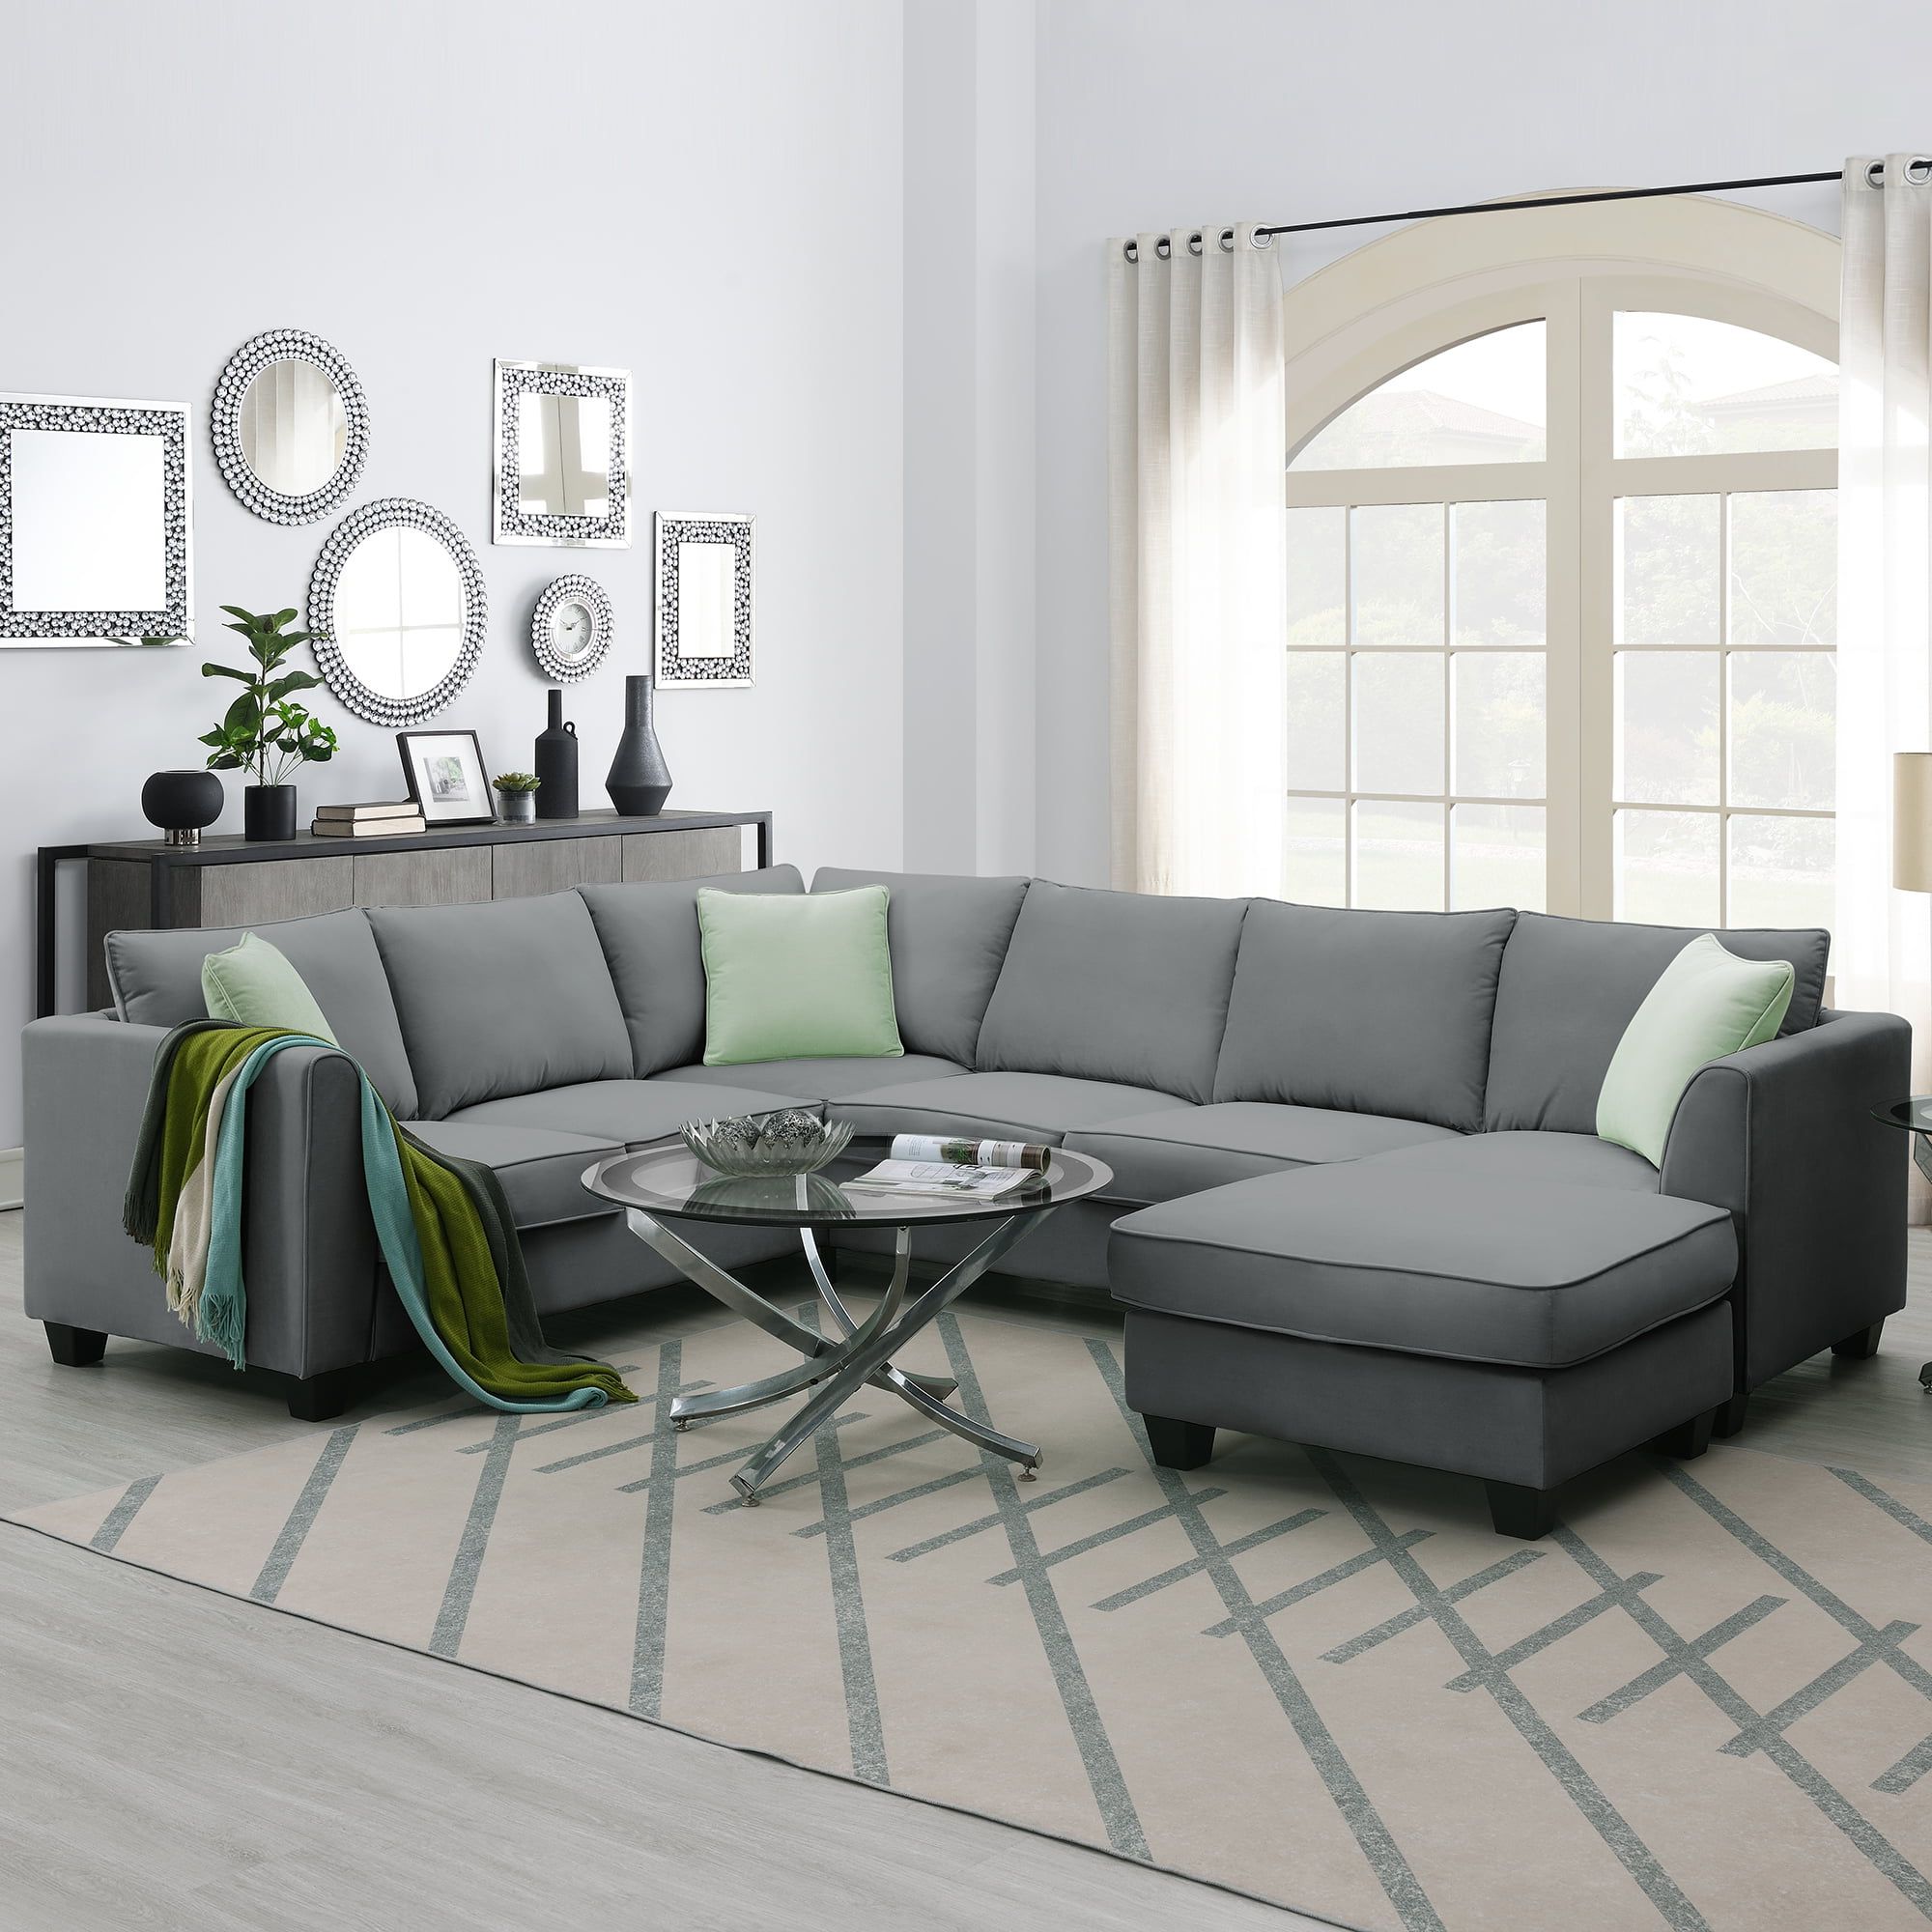 L Shaped Modular Sectional Couch, Kamida 7 Seater Sectional Couch With  Ottoman And 3 Pillows, Modern L Shaped Fabric Upholstered Couch Furniture,  Heavy Duty Sectional Couch For Living Room, Gray – Walmart Within 7 Seater Sectional Couch With Ottoman And 3 Pillows (View 2 of 20)